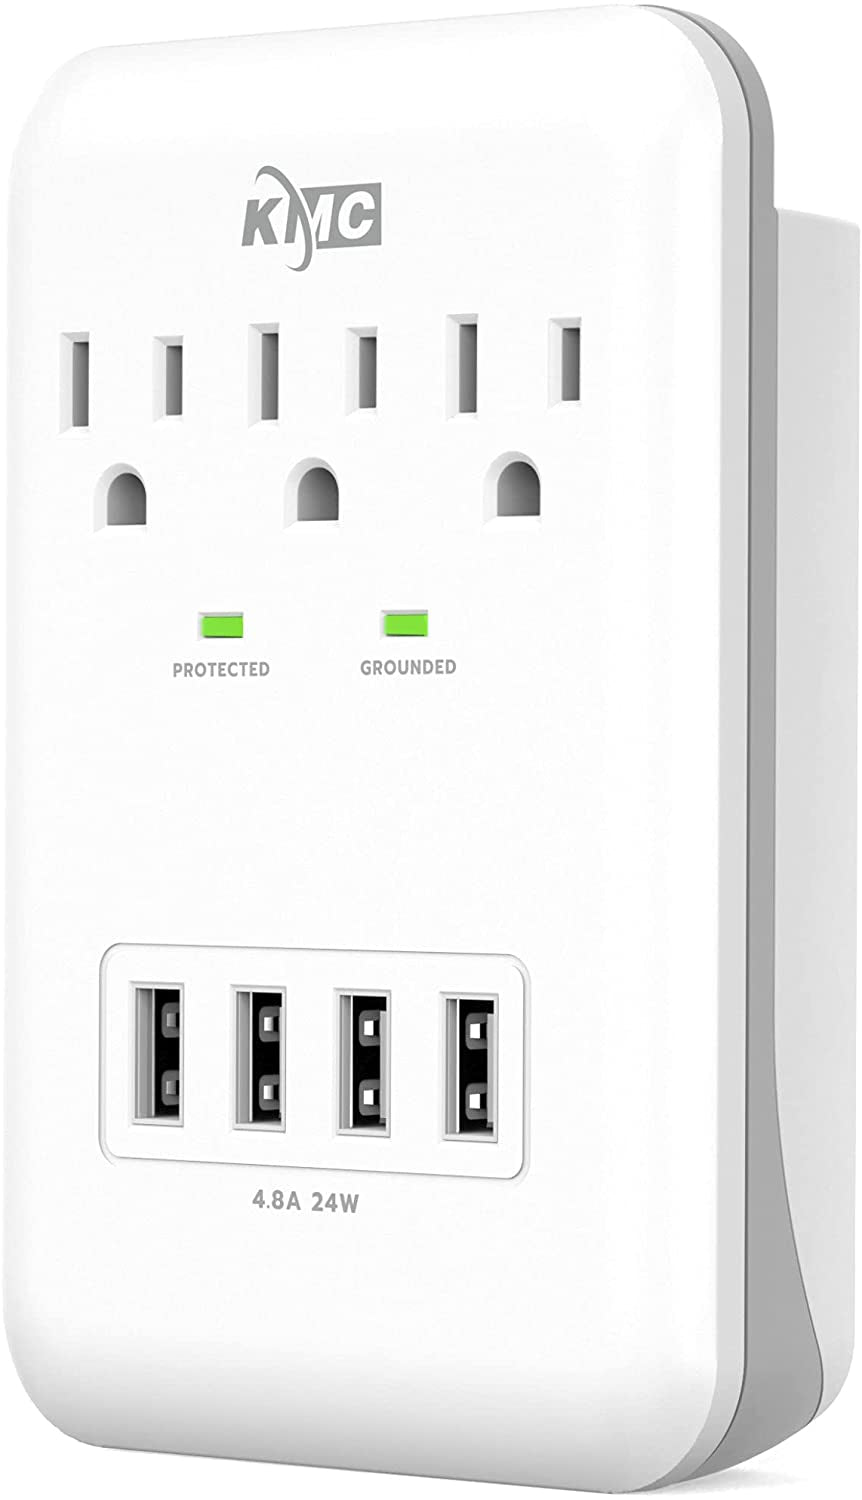 3-Outlet Wall Mount Surge Protector, 900 Joules, 4 USB 4.8 AMP USB Charging Ports, Phone Holder Cradle for Home, School or Office, ETL Certified